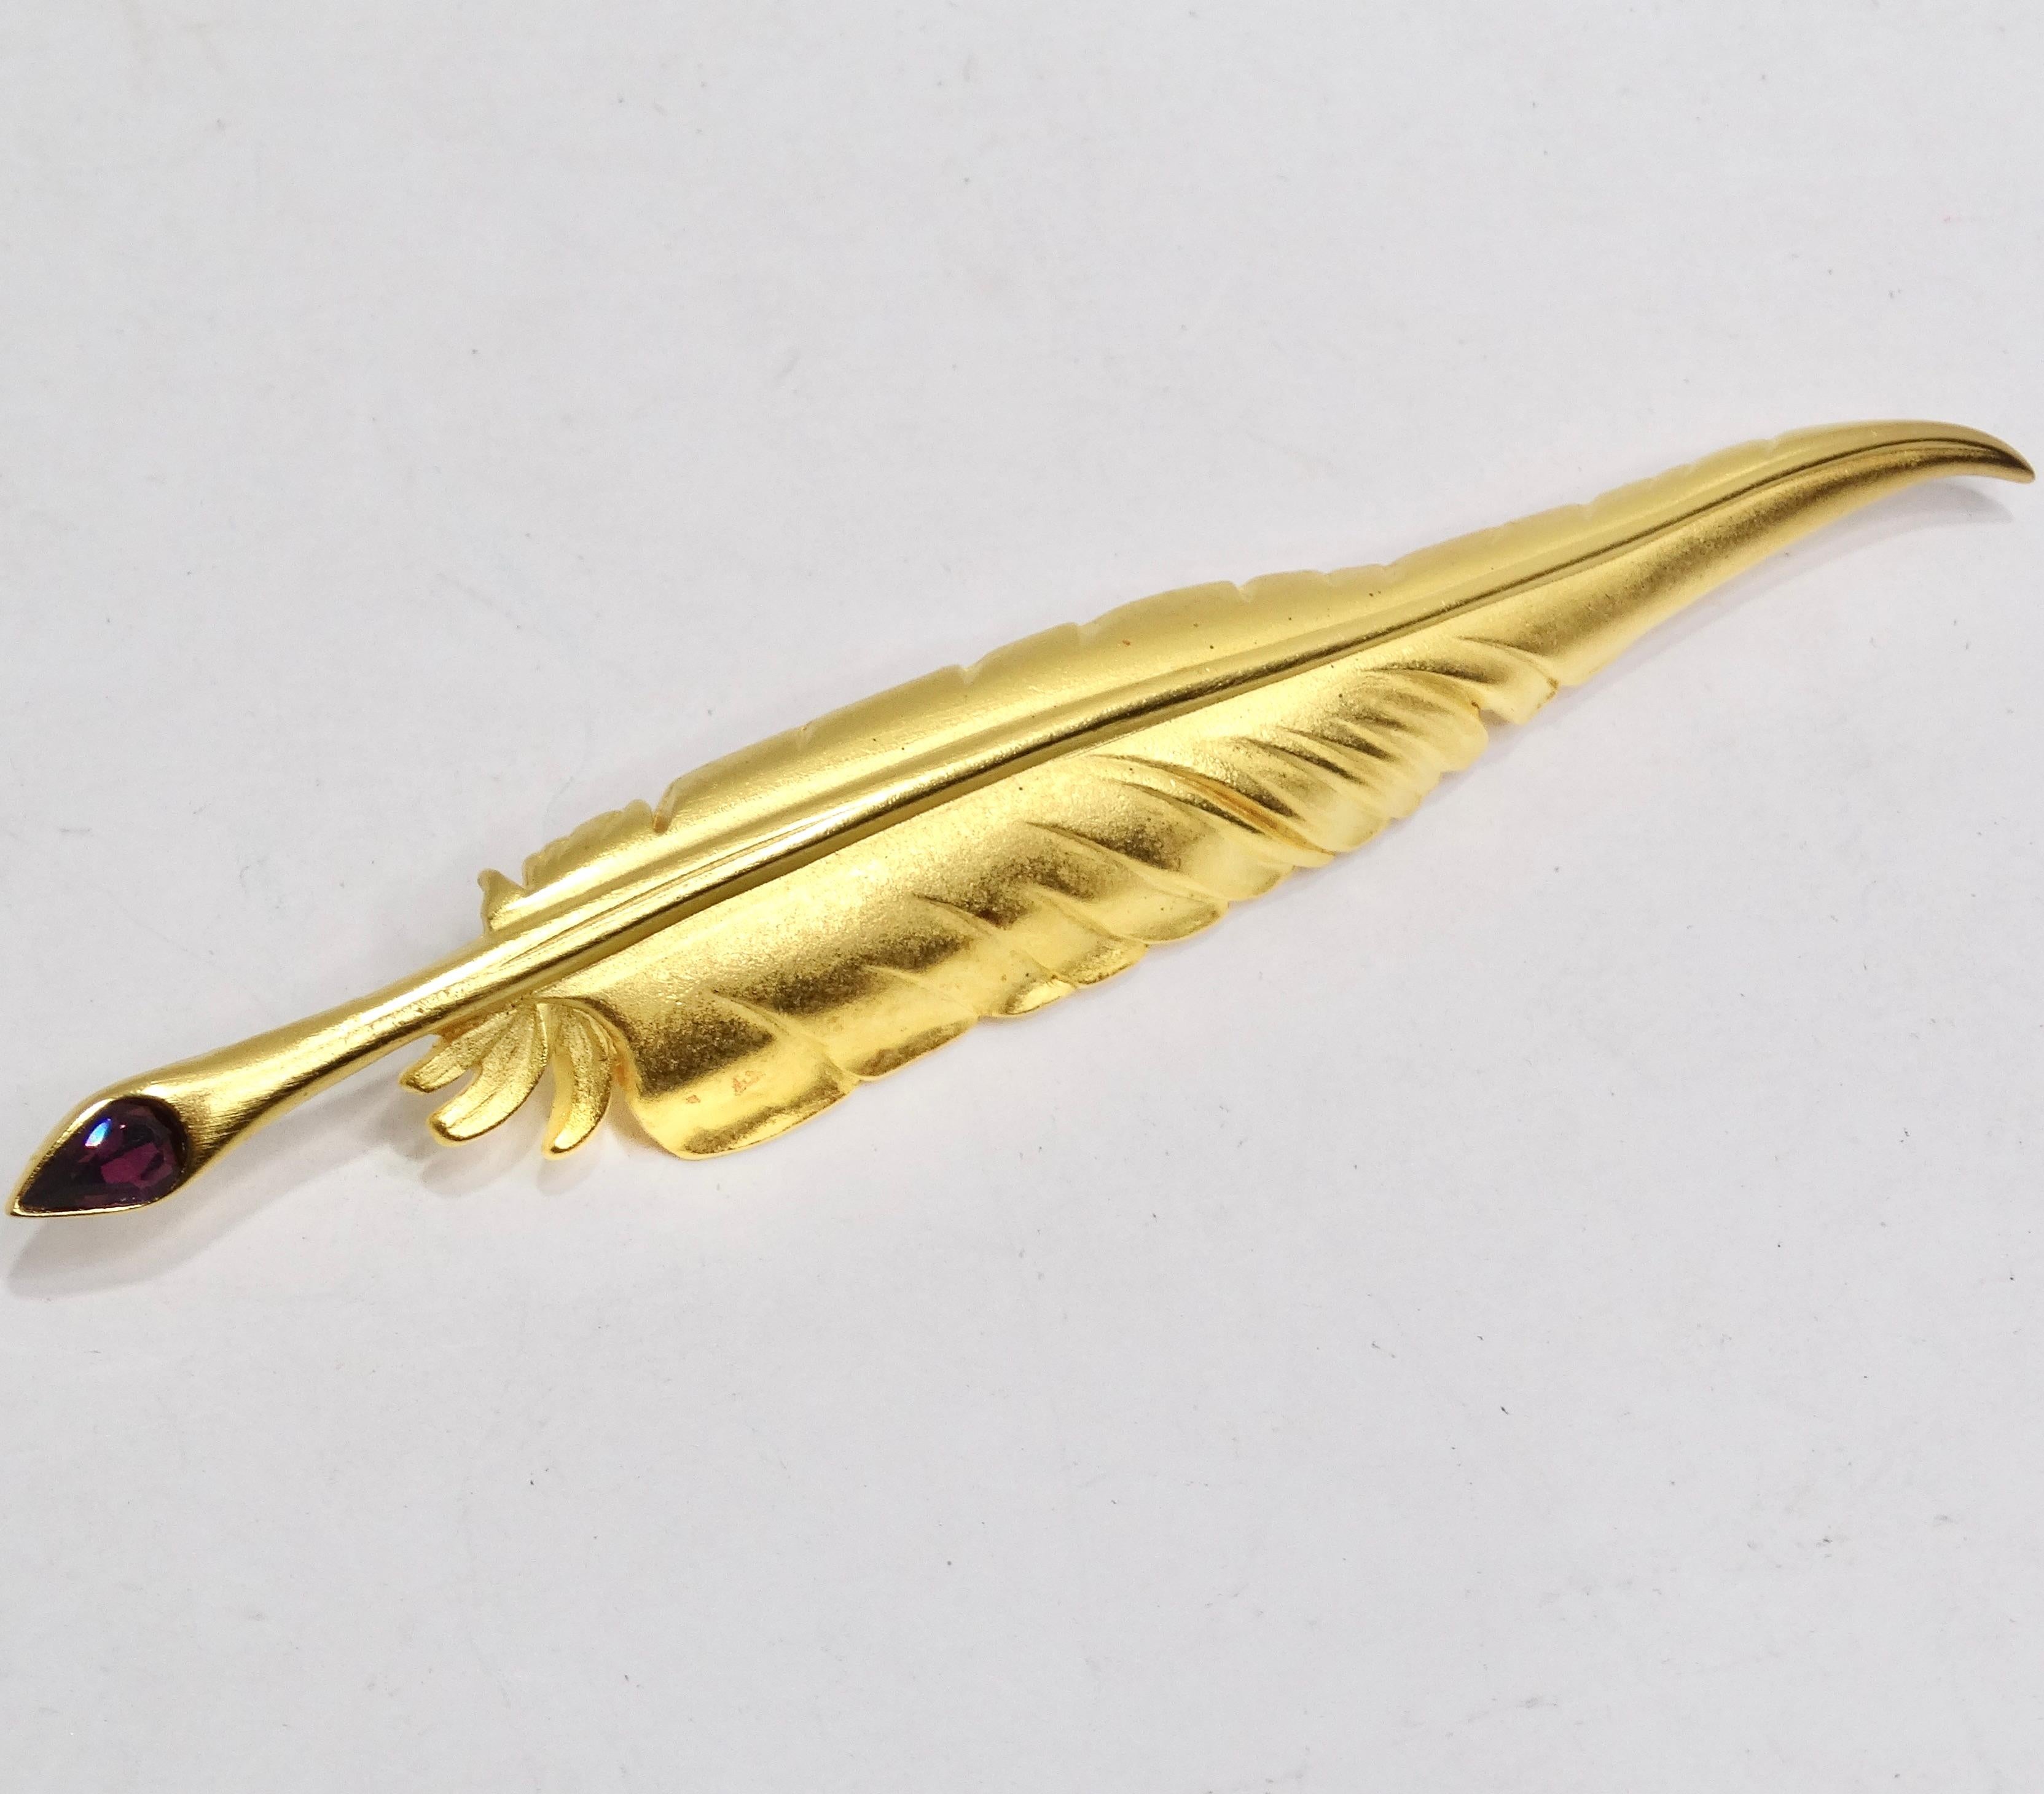 Introducing the Karl Lagerfeld 1980s Gold Plated Purple Gem Feather Brooch – a stunning statement piece that embodies chic elegance. This shiny yellow gold plated brooch is crafted in a sleek feather shape, featuring a captivating purple gem at the